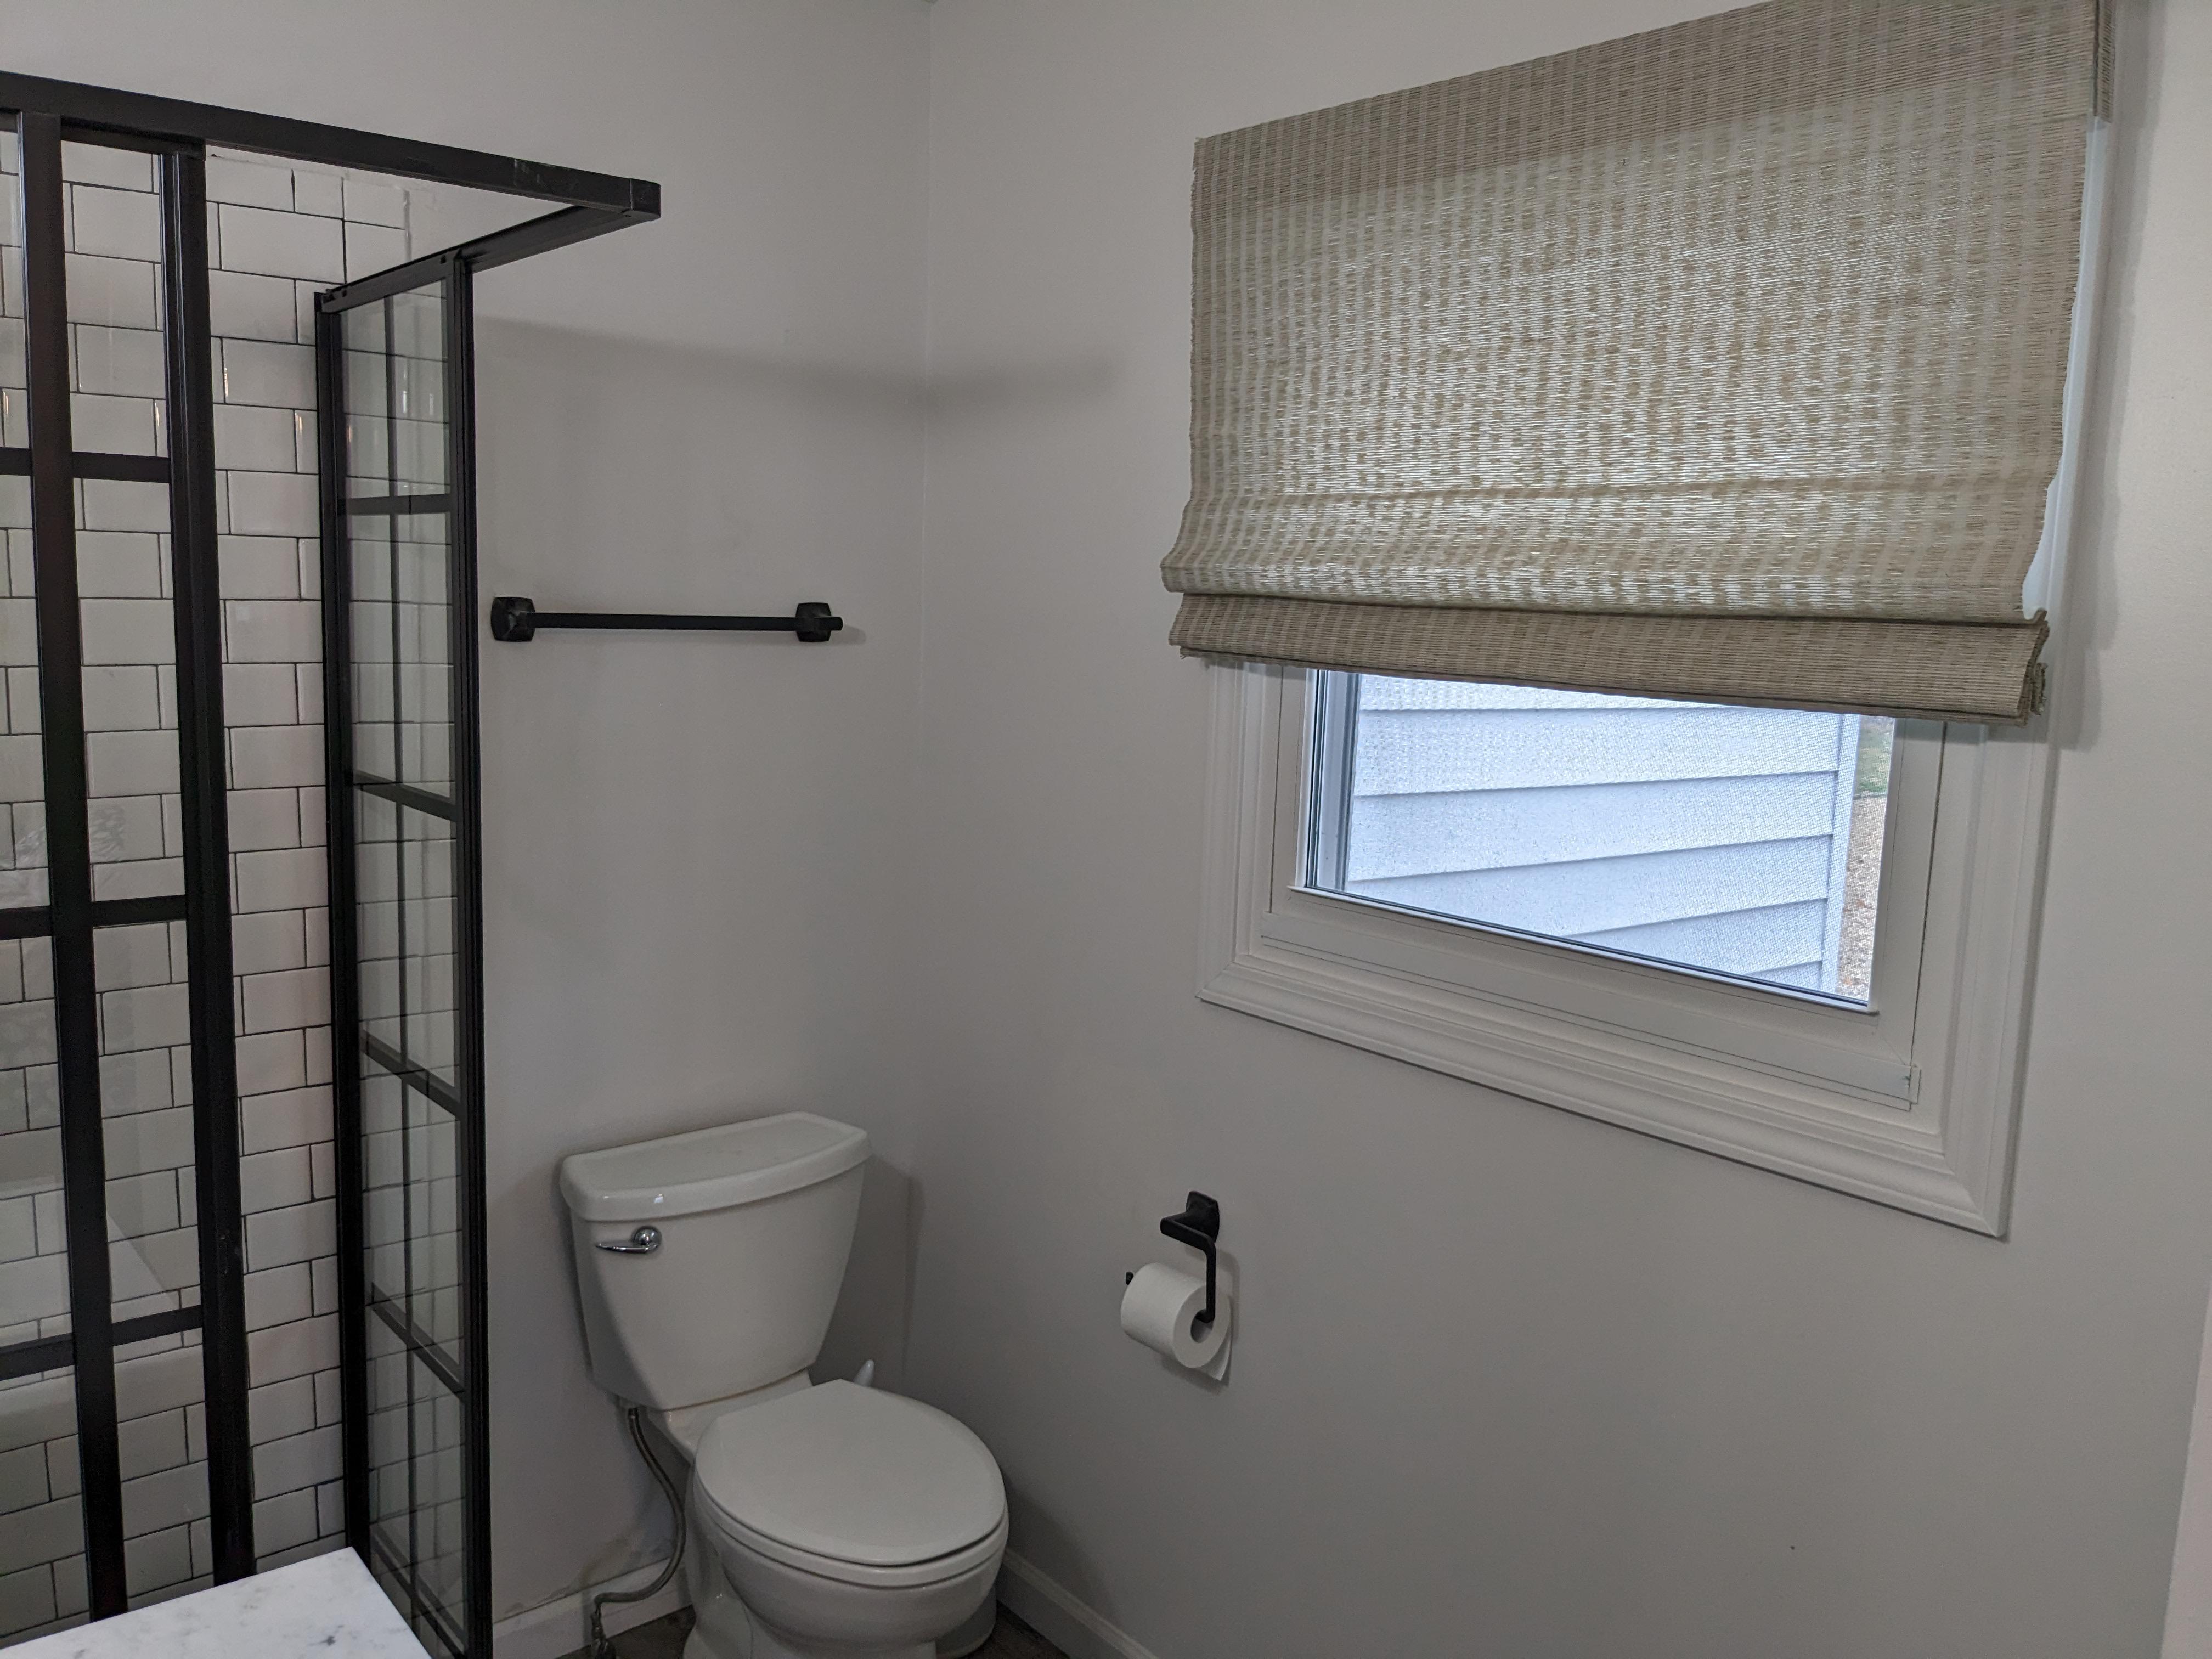 Cordless, light filtering natural shade in bathroom.  BudgetBlinds  WindowCoverings  Shades  NaturalShades  SpringfieldIllinois